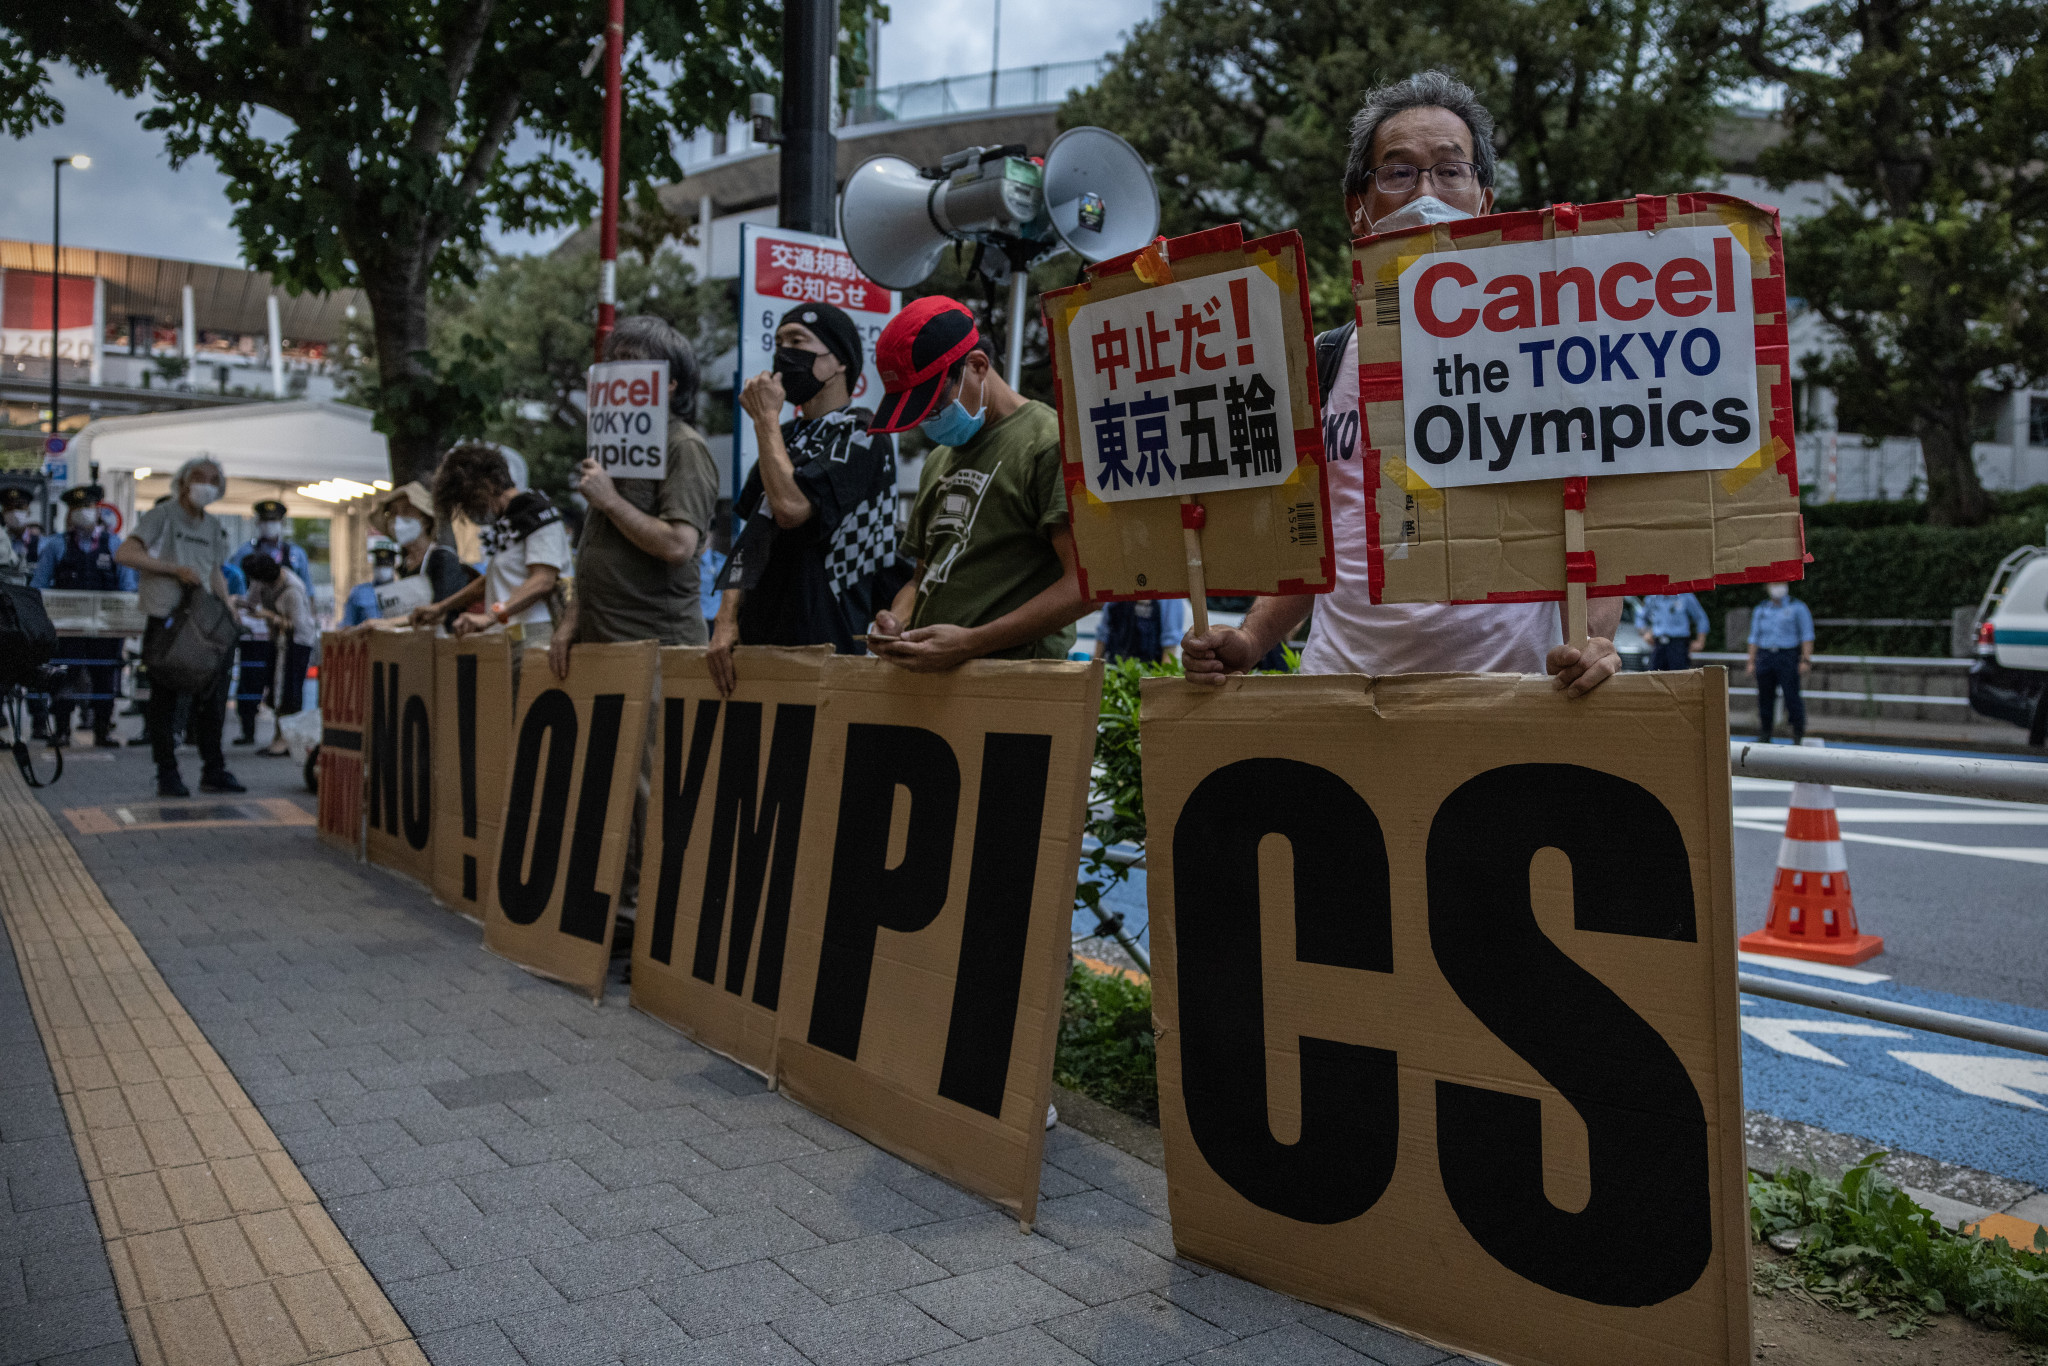 There have been protests against the Tokyo 2020 Olympics going ahead due to the rising number of COVID cases in Japan ©Getty Images